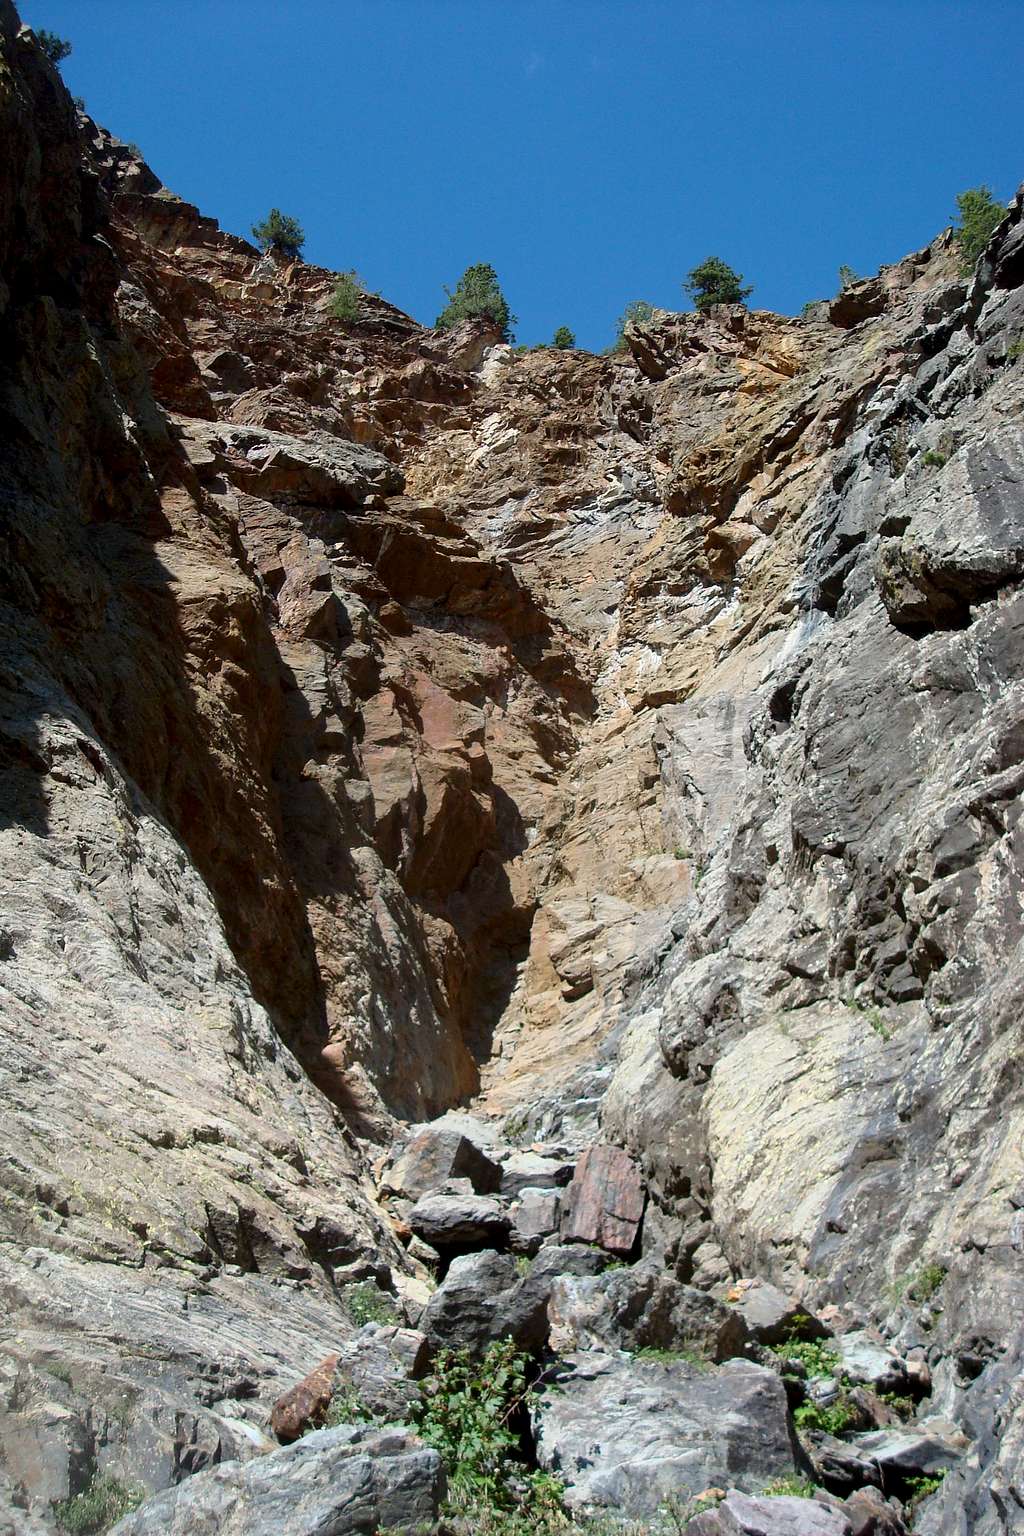 Overview of the gully